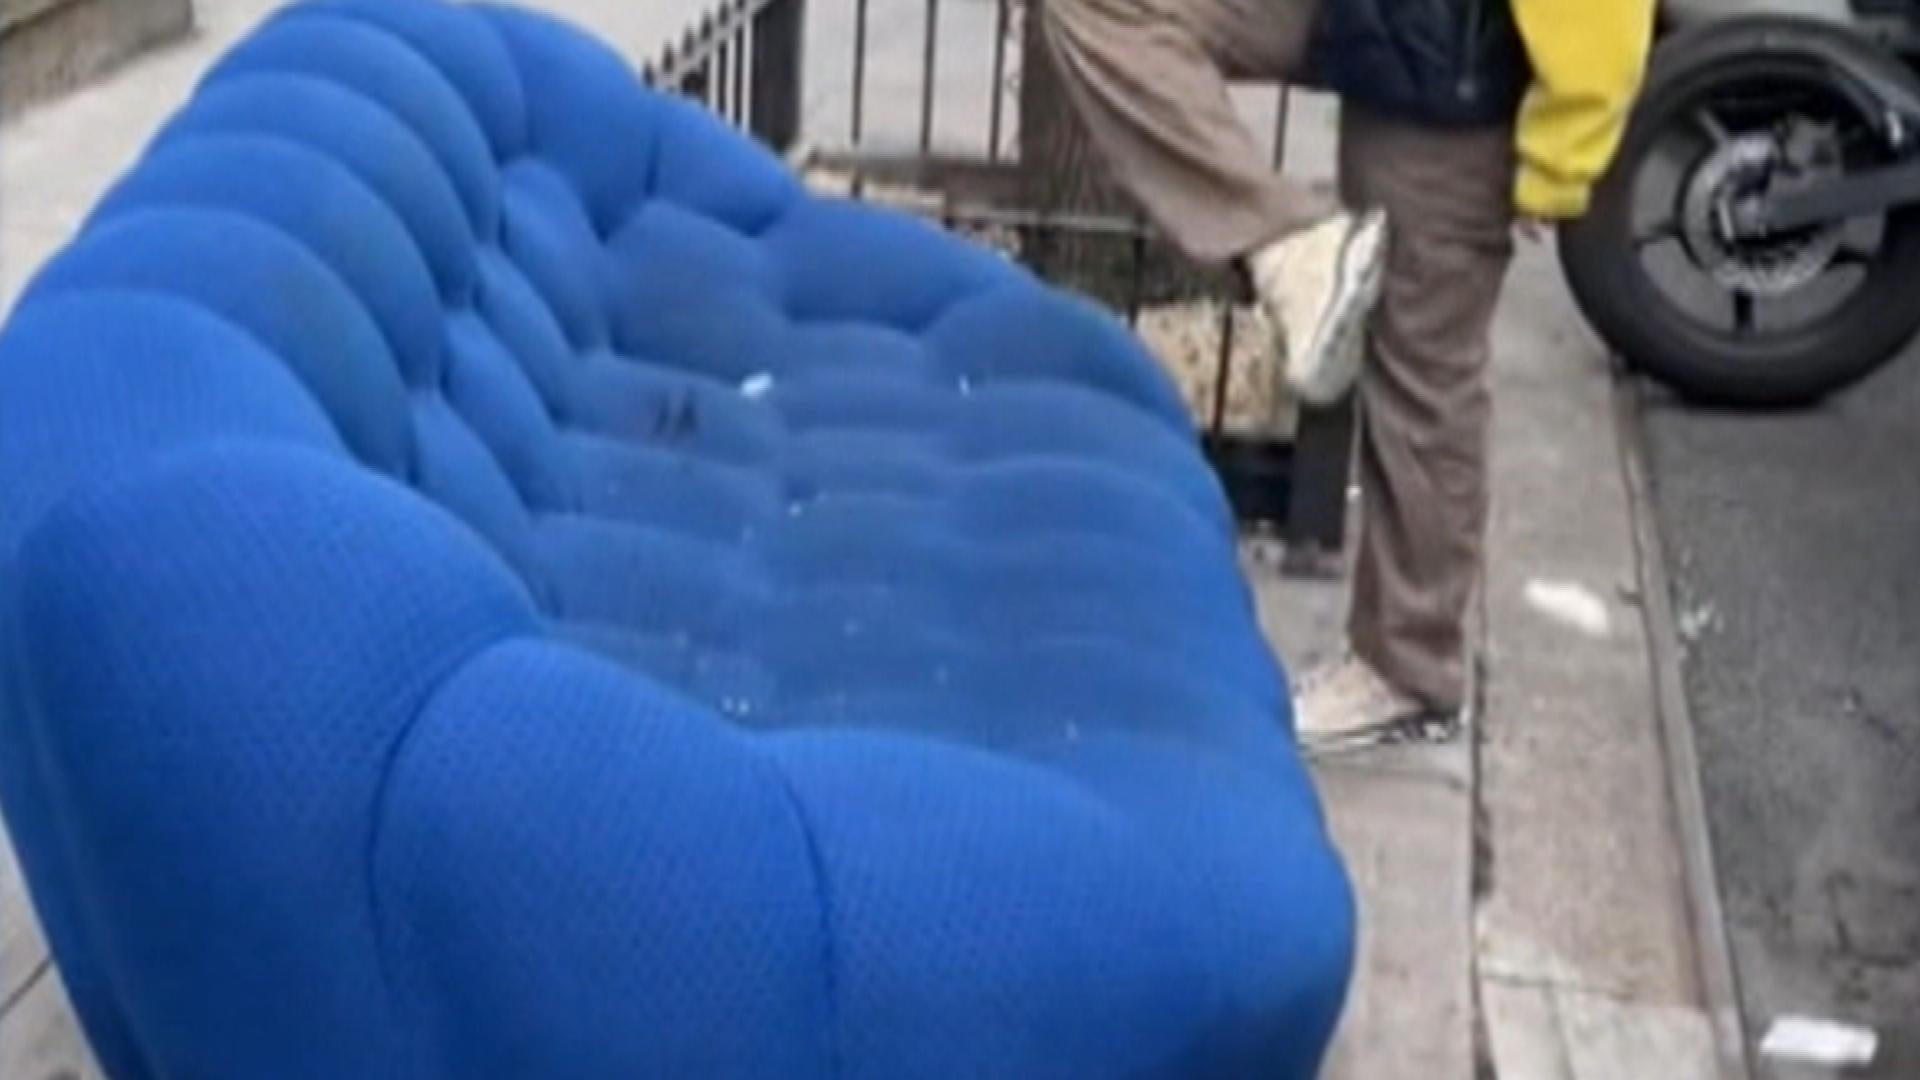 https://www.insideedition.com/sites/default/files/images/2023-05/053023_blue_couch_web.jpg